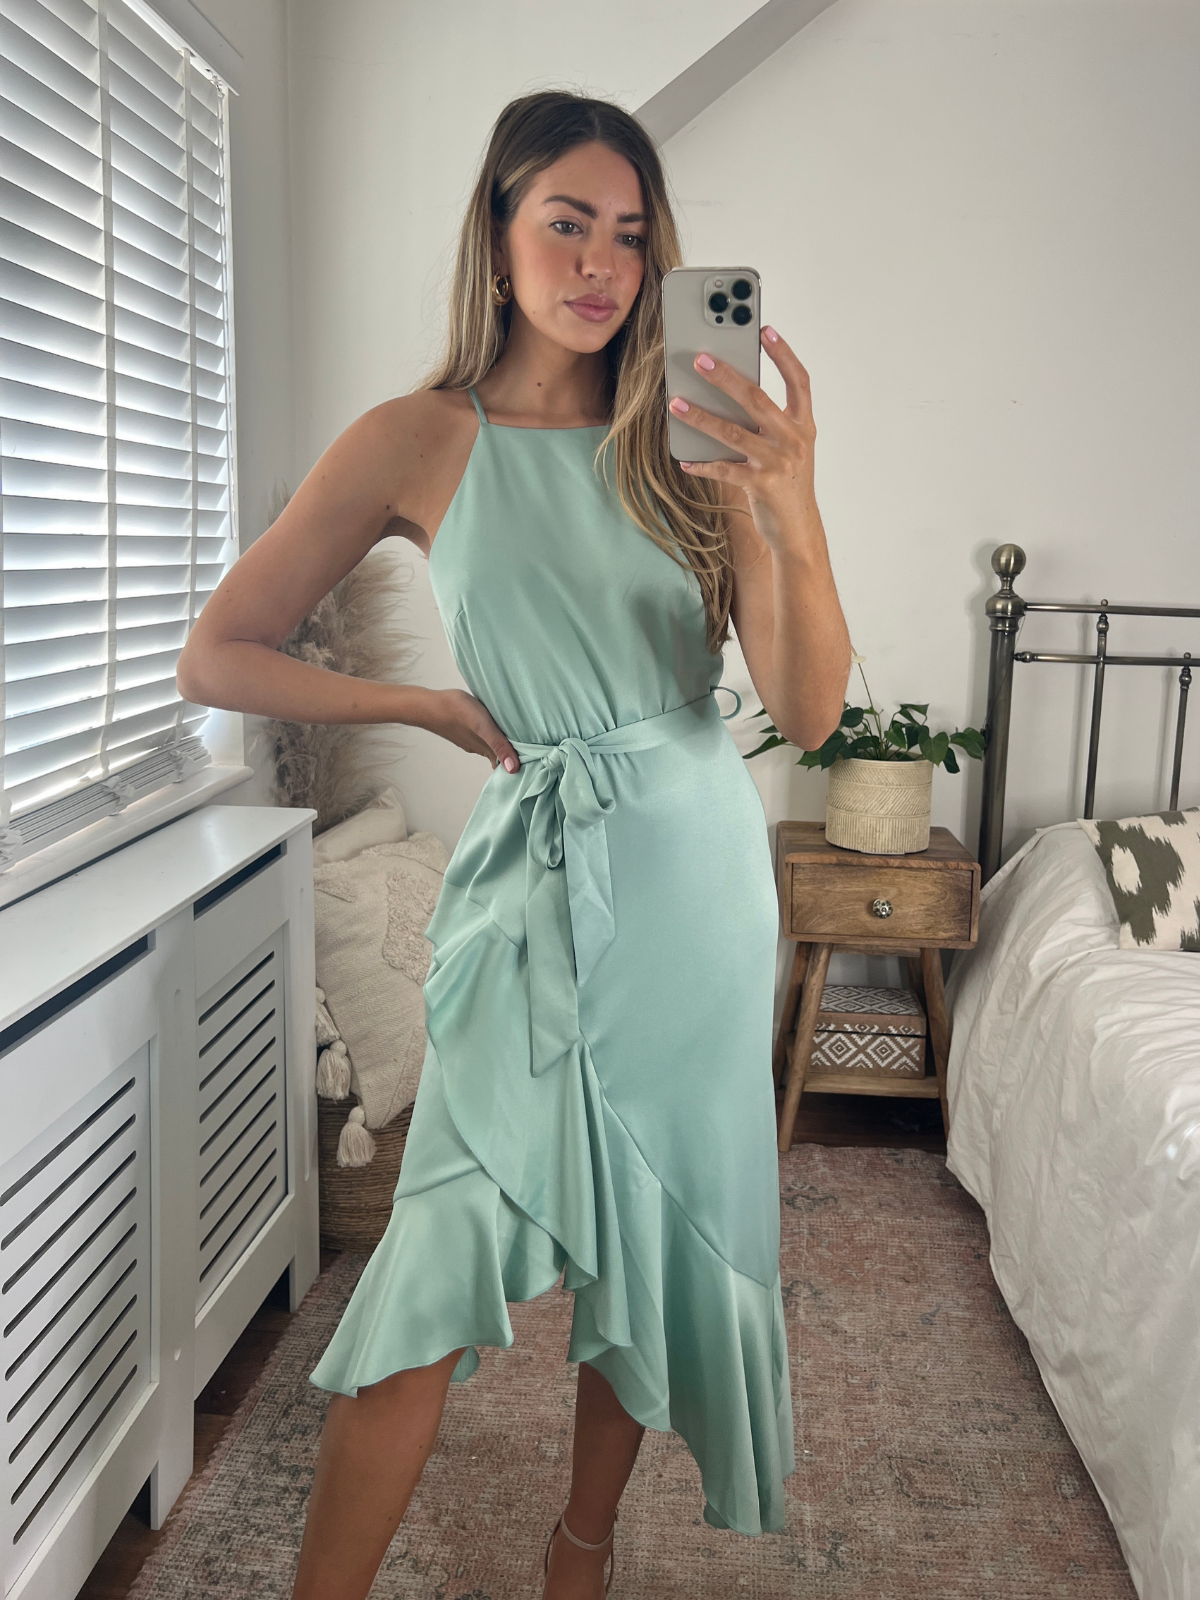 15 Looks With Halter Belted Dresses - Styleoholic